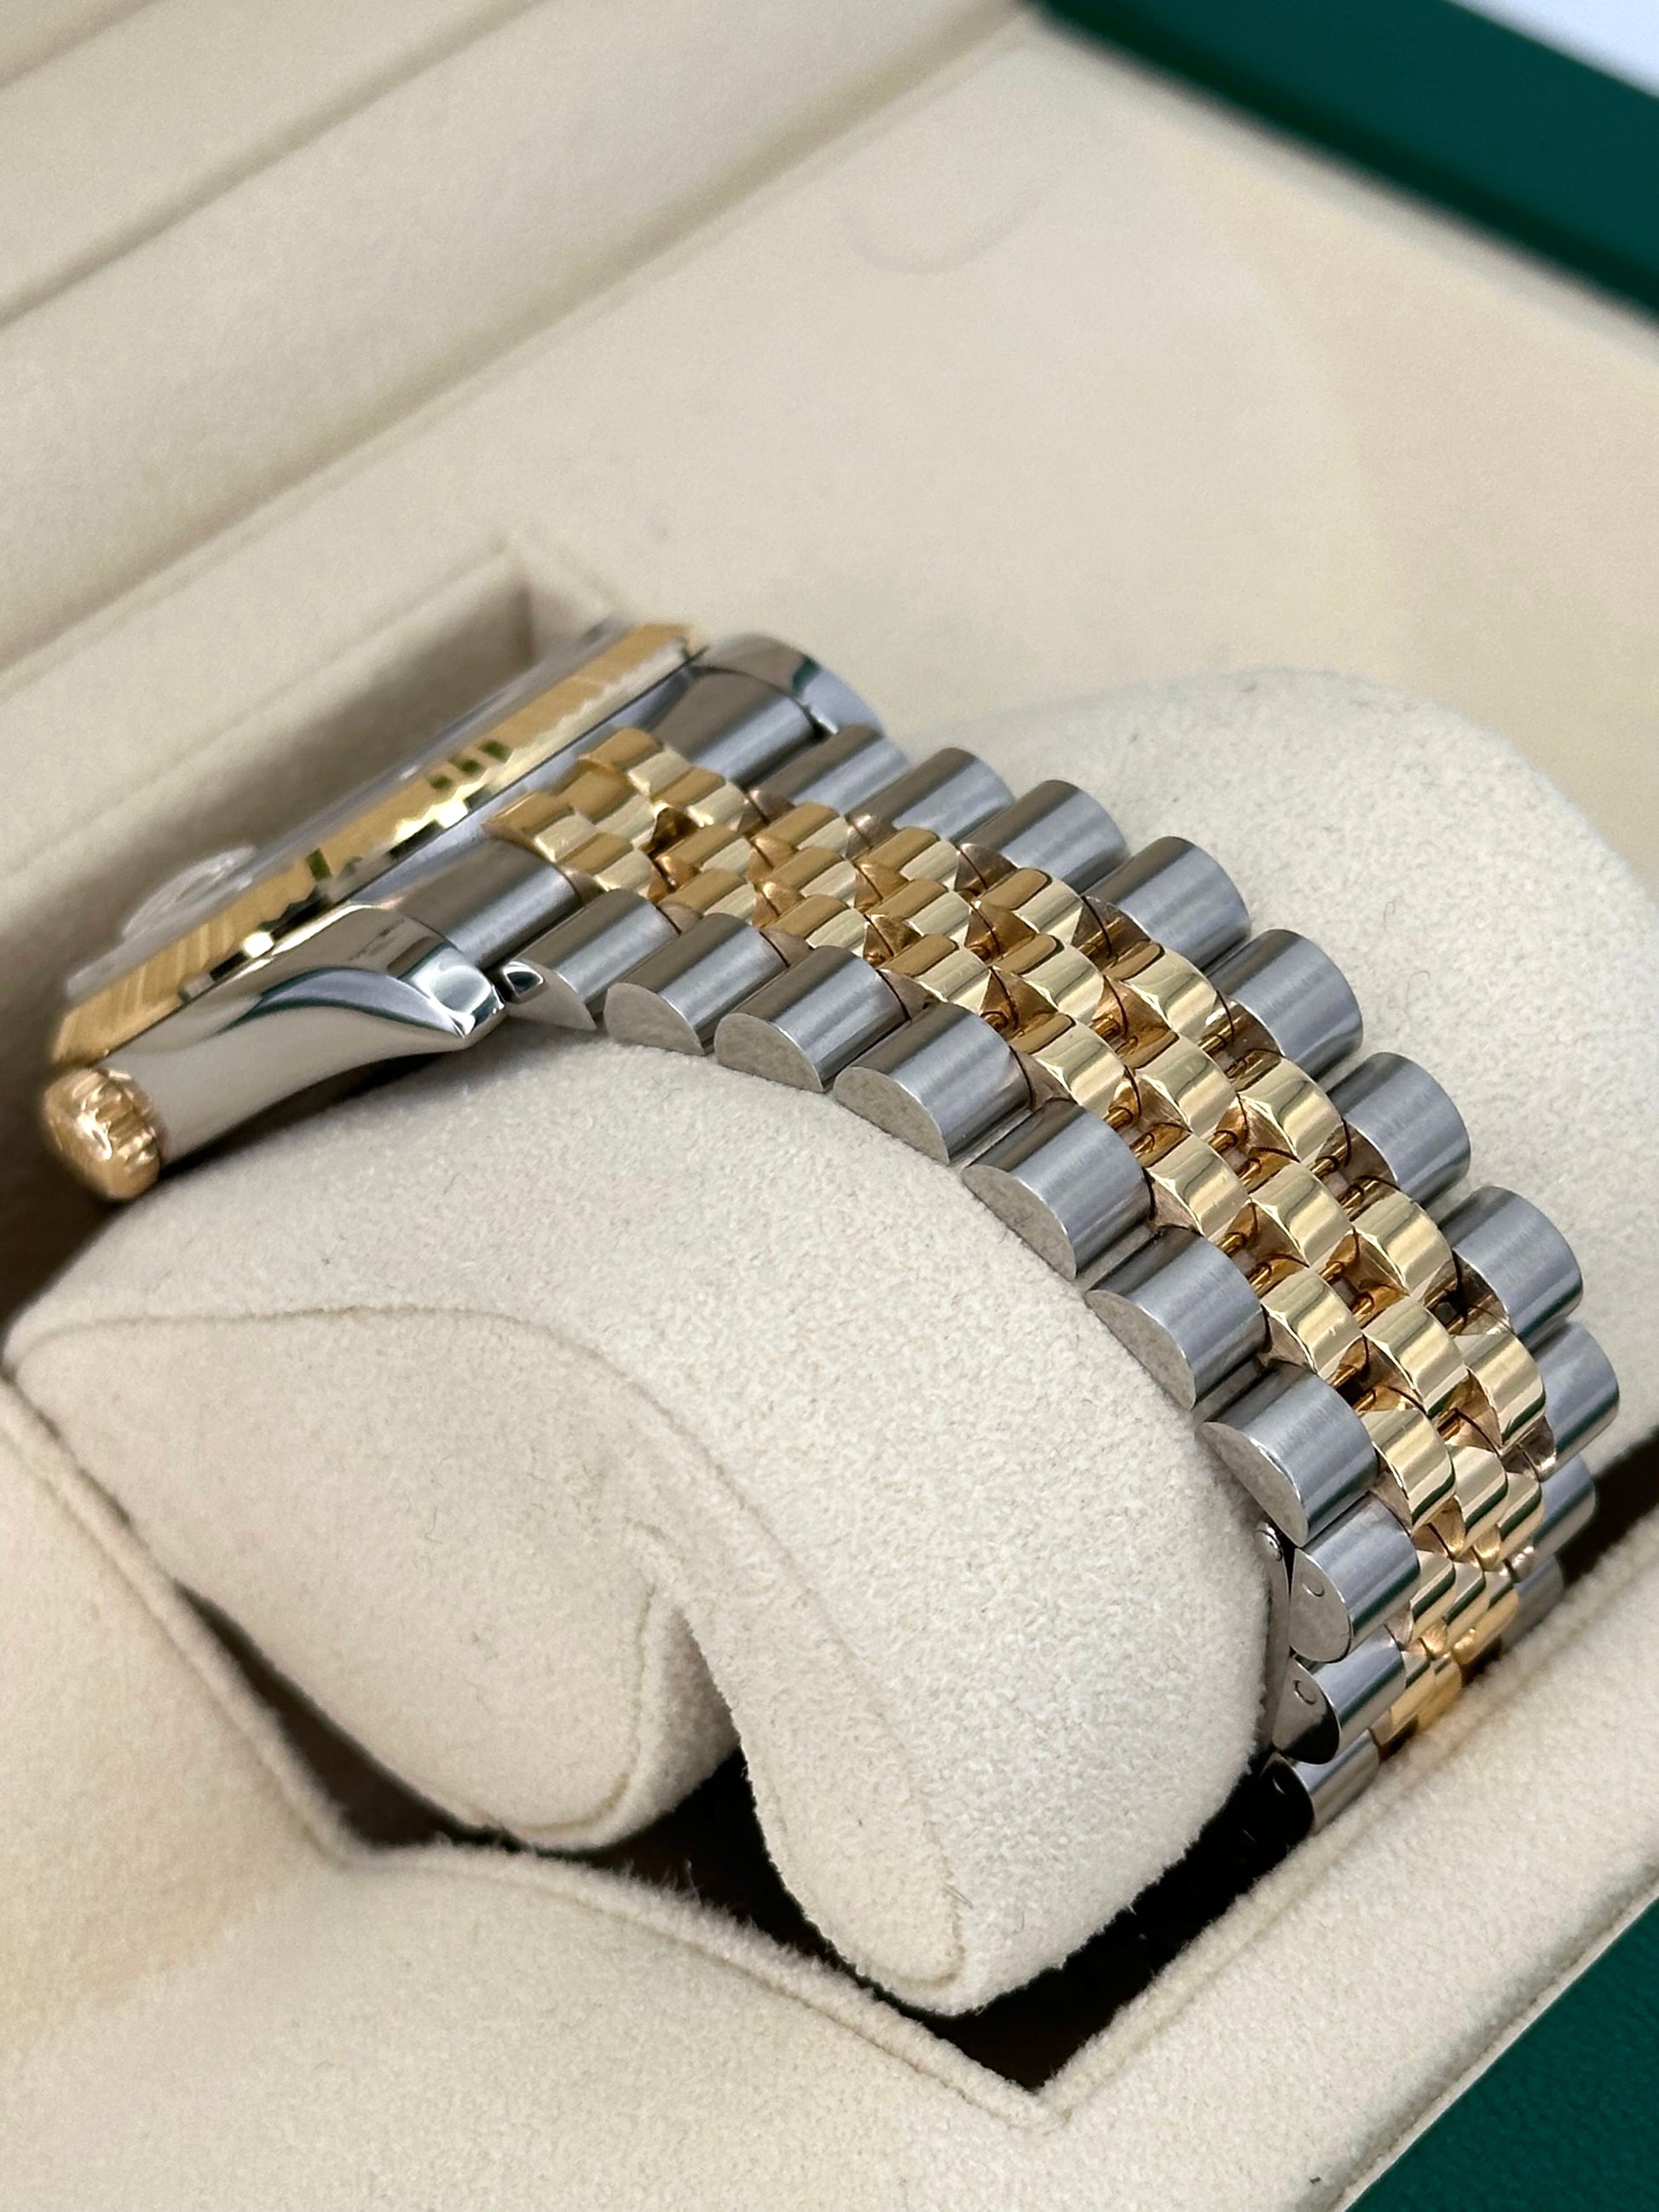 2005 Rolex Datejust 36mm 116233 Two-Tone Jubilee Champagne Dial - MyWatchLLC